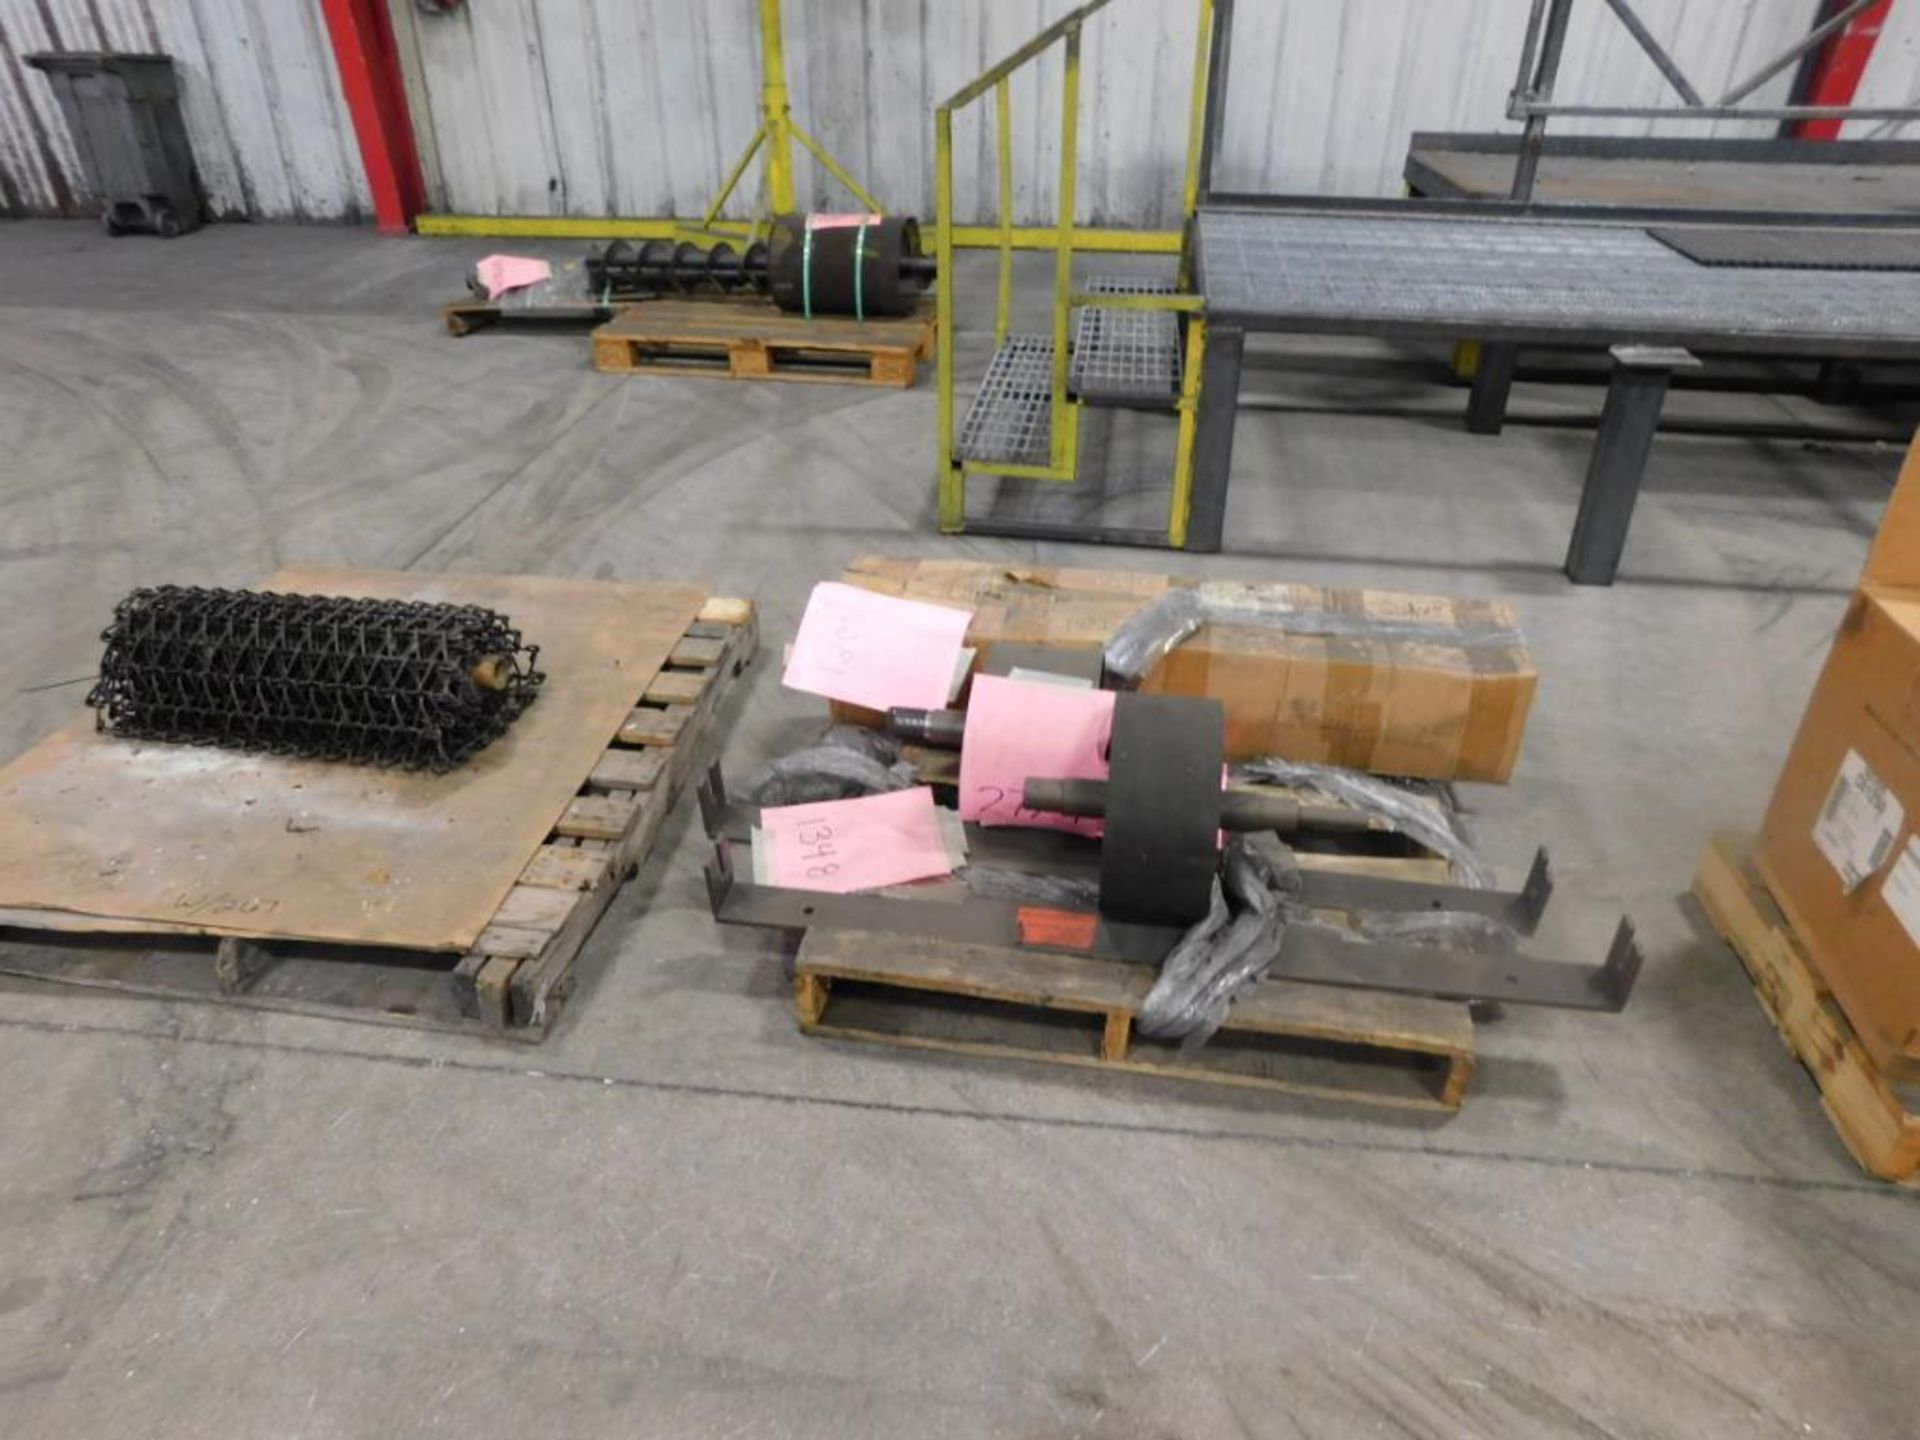 LOT: Spare Parts for Wheelabrator Shot Blast Machine including 15 HP Motor, Auger Assembly, Pulleys, - Image 3 of 3